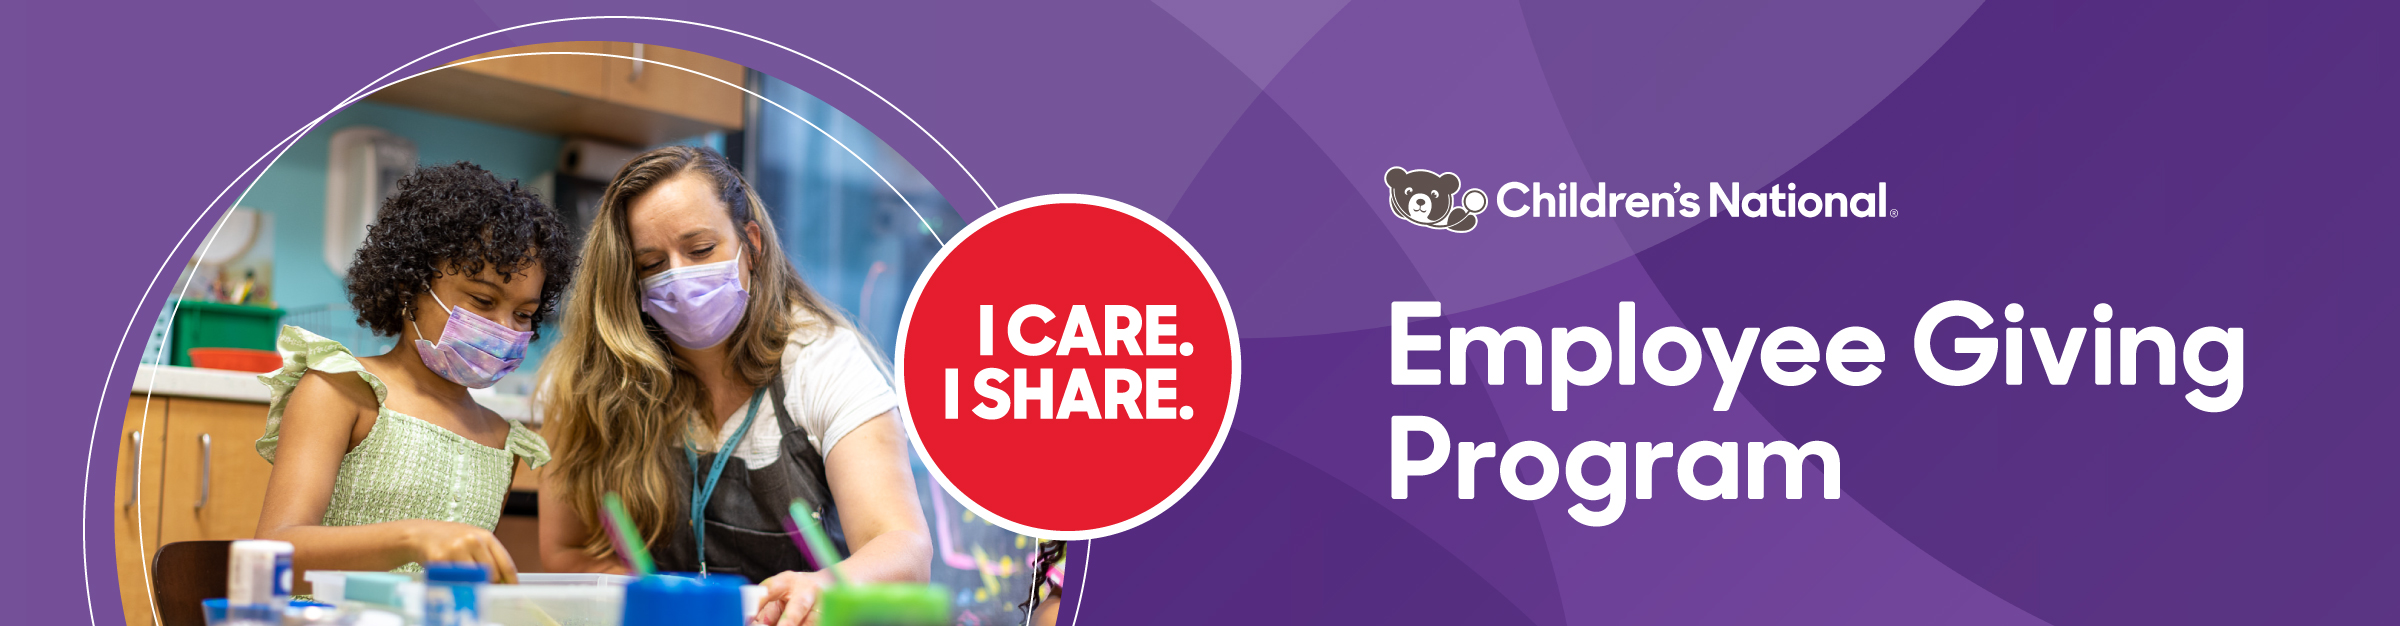 I CARE. I SHARE. 150 Years Stronger with YOU! - Employee Giving Campaign